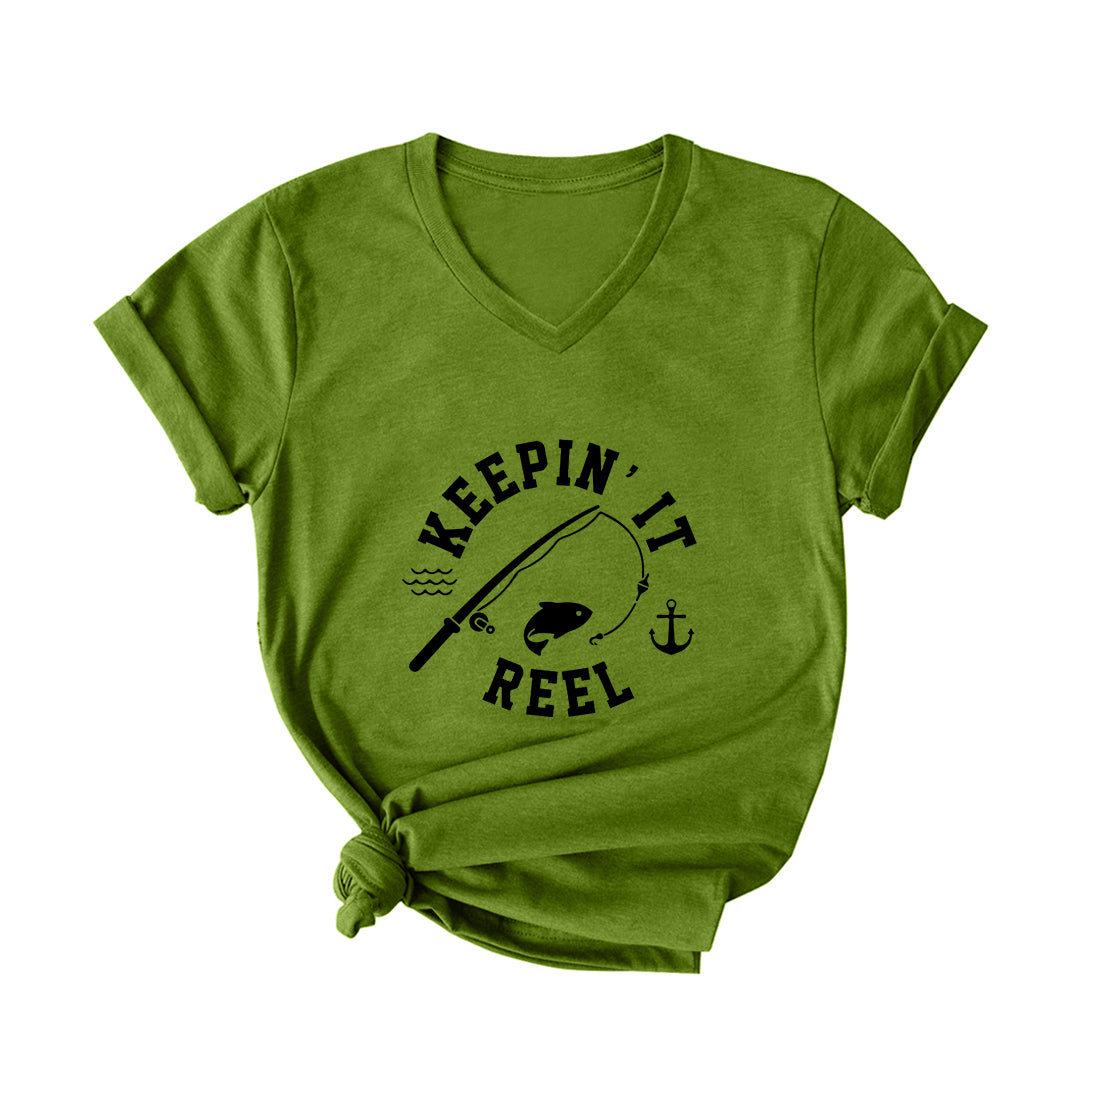 KEEPIN' IT REAL V Neck T-Shirt for Women